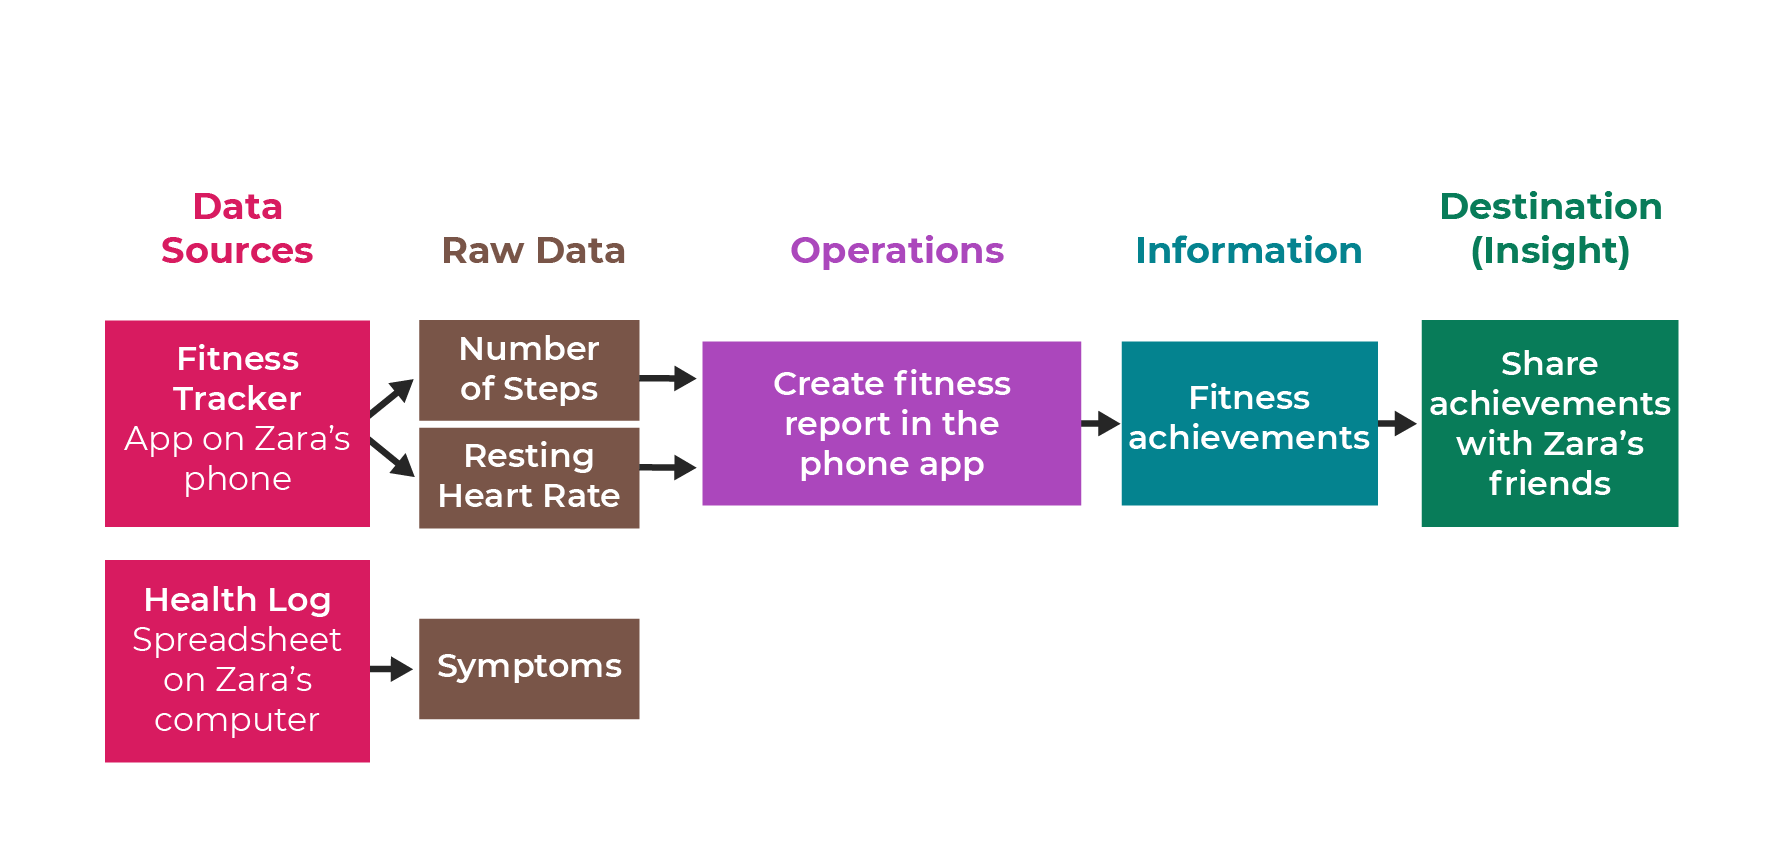 A picture shows the continuation of the previous data pipeline for Zara, but with a new data source: health log. The raw data issued from it are Zara's symptoms.